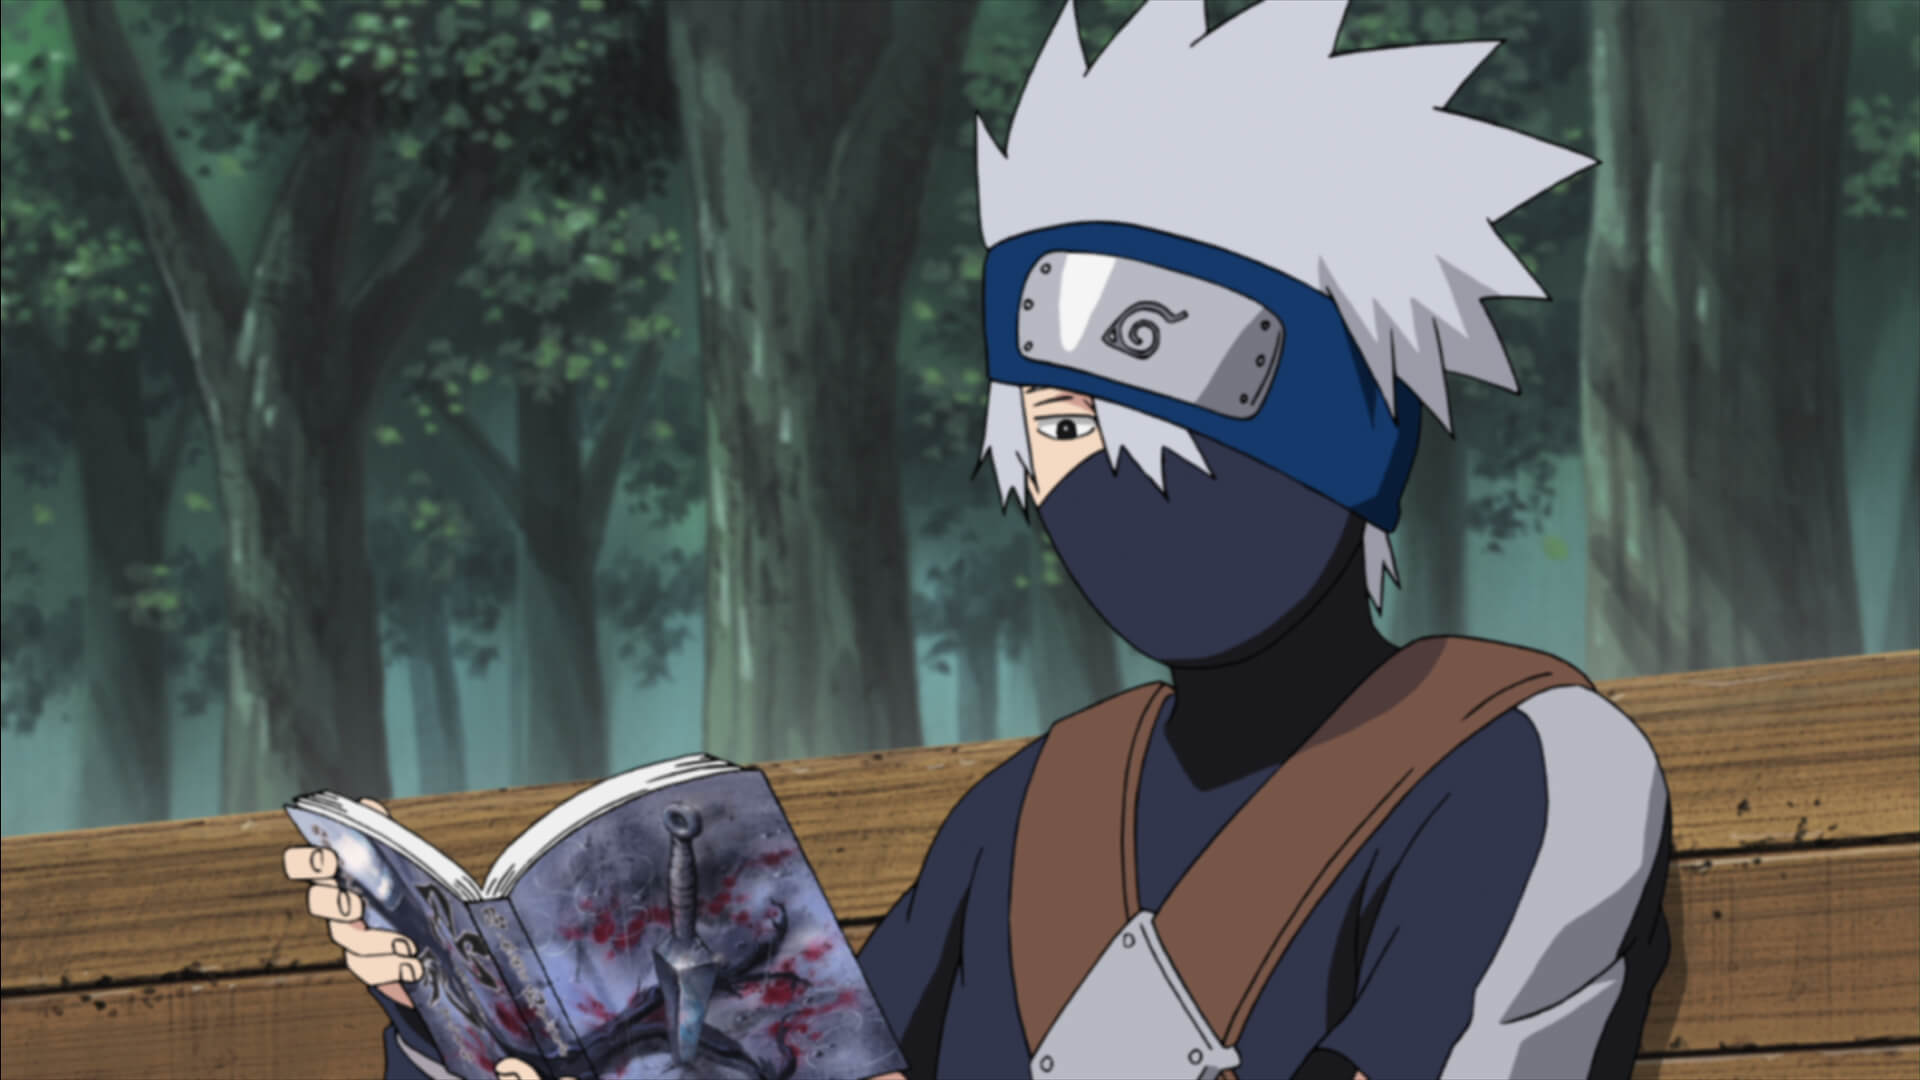 What's the secret behind Kakashi's mask in Naruto?